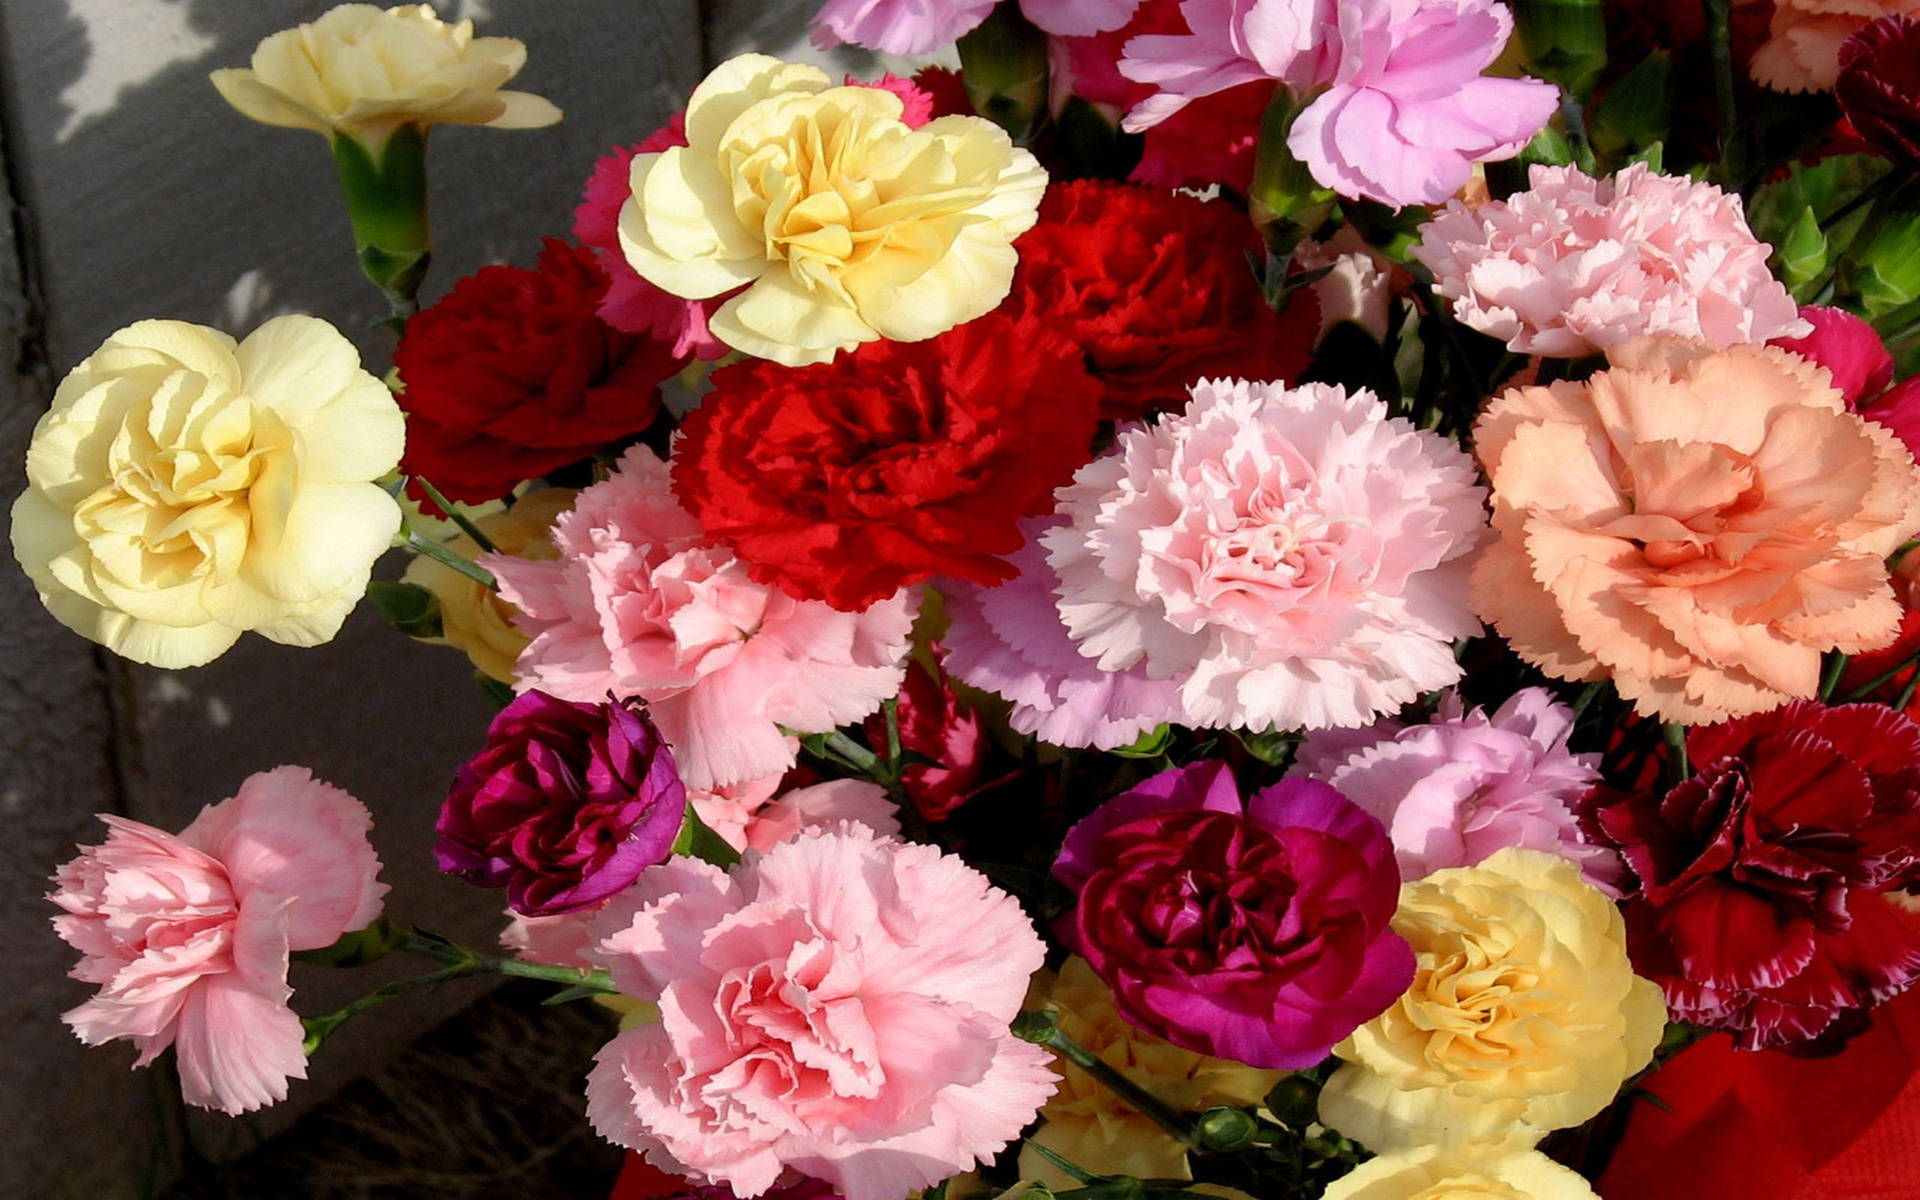 Assorted Carnation Flowers